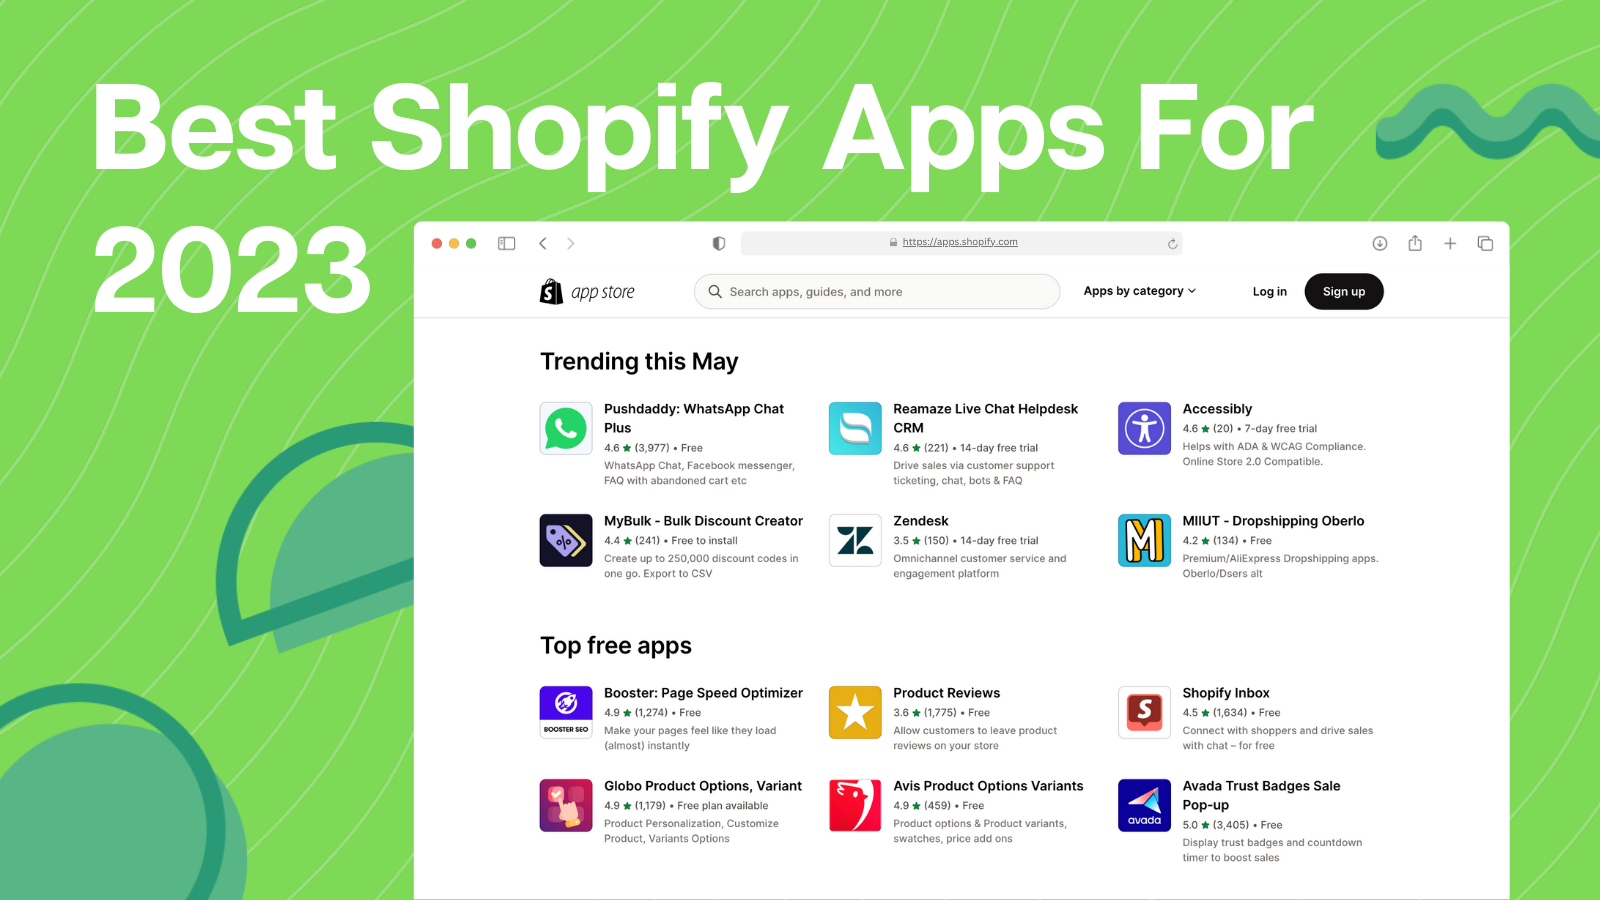 Best Shopify Apps For 2023